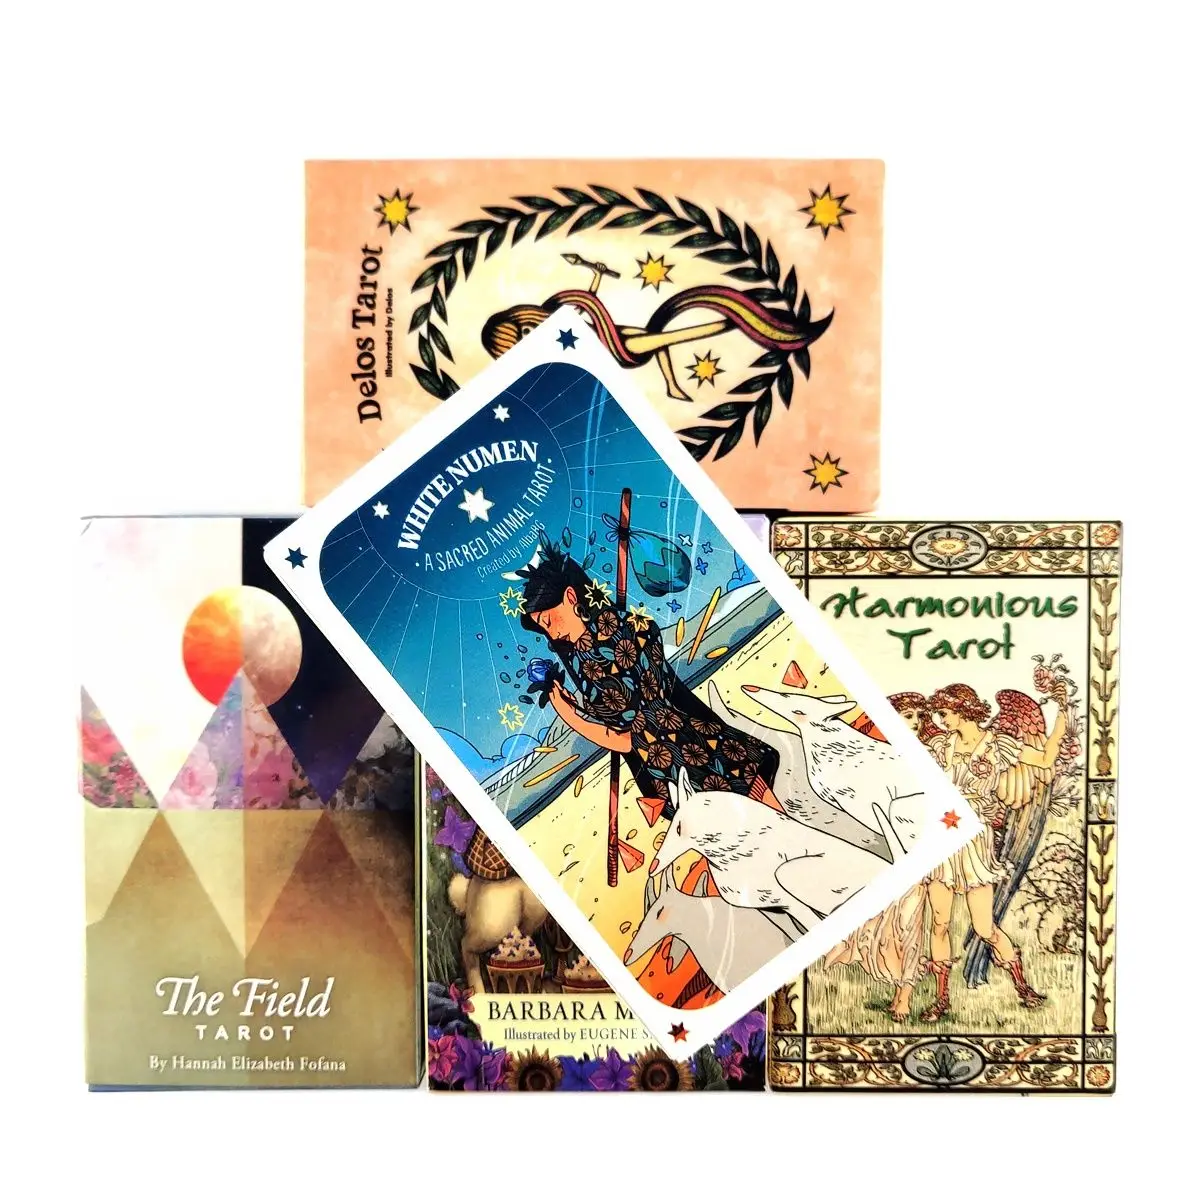 

Hot Sell White Numen A Sacred Animal Tarot Cards High Quality Tarot Deck With Guidebook Board Game For Fate Divination 78 Pcs